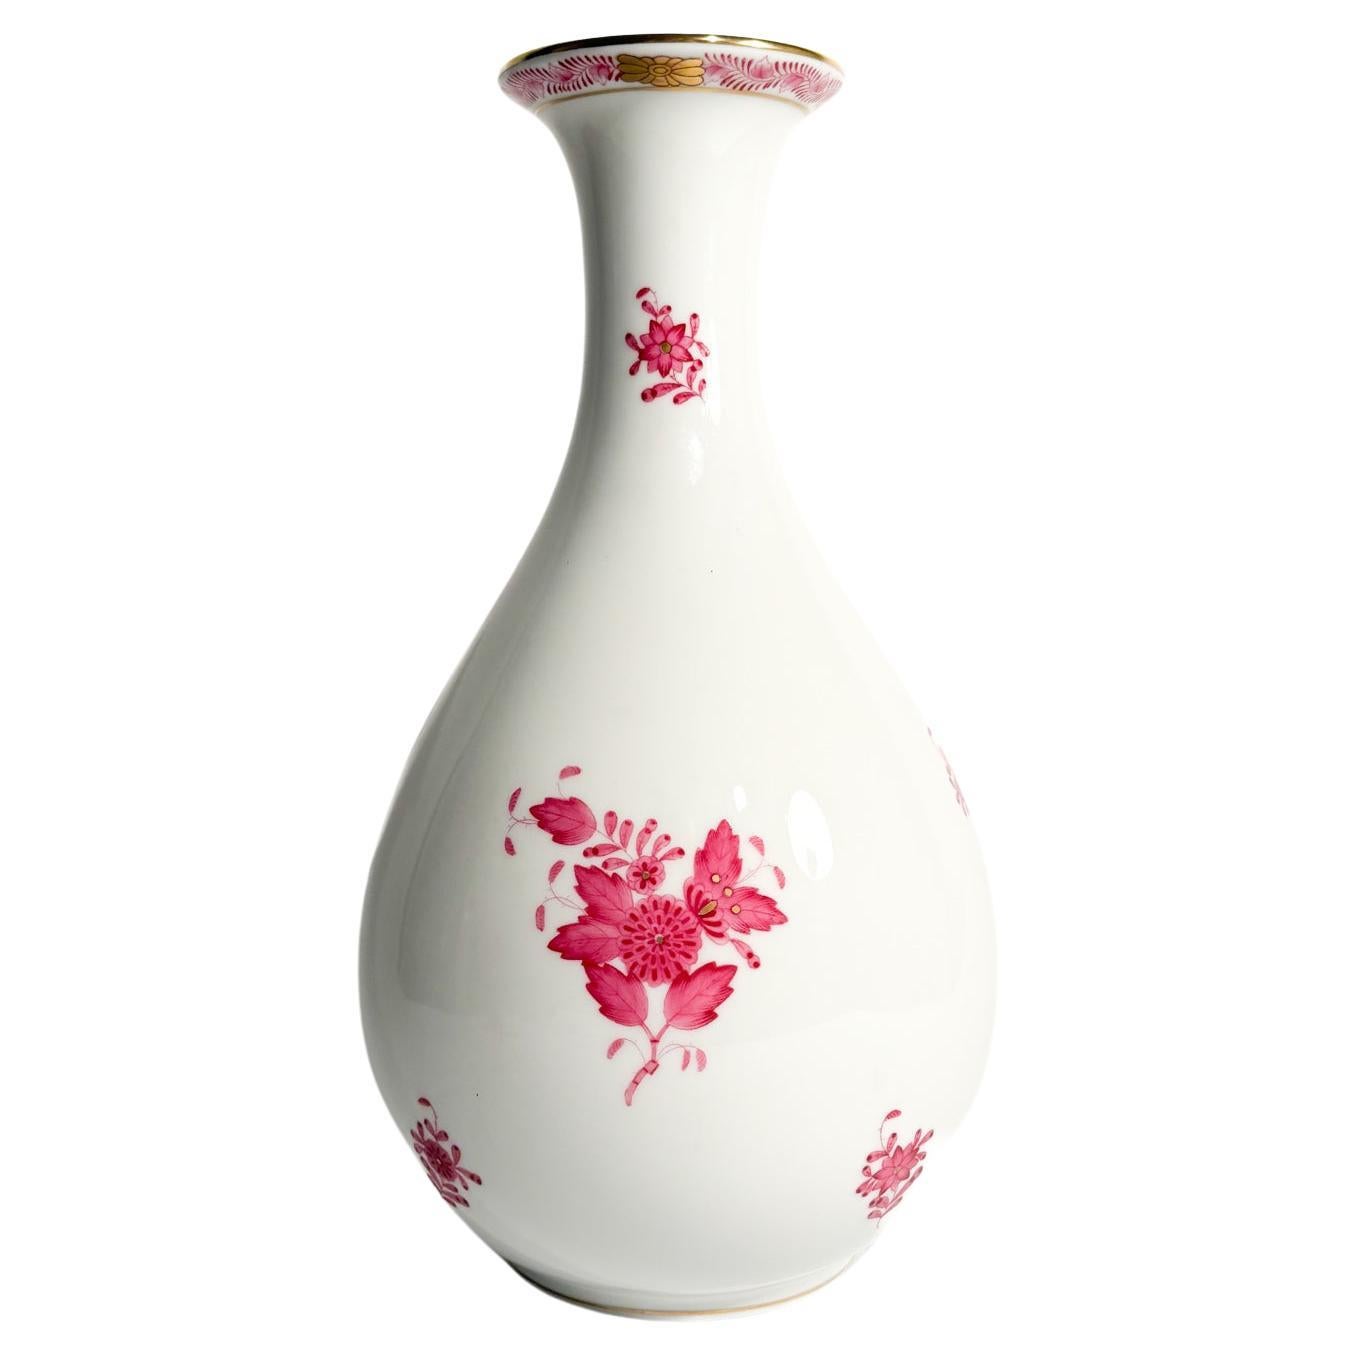 Herend Apponyi Pink Porcelain Vase from the 1950s For Sale